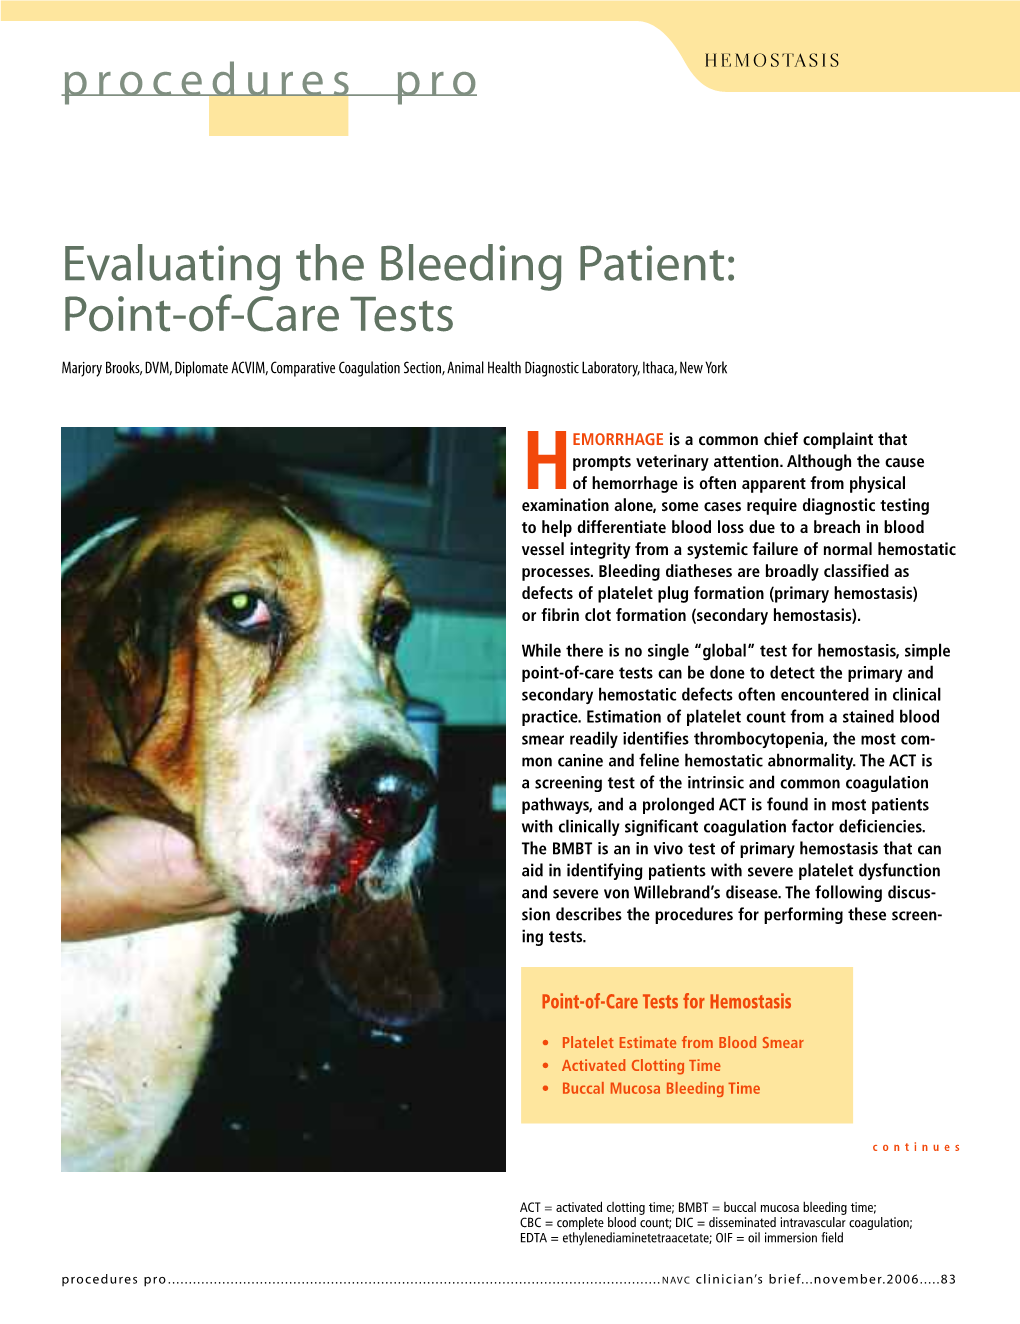 Evaluating the Bleeding Patient: Point-Of-Care Tests